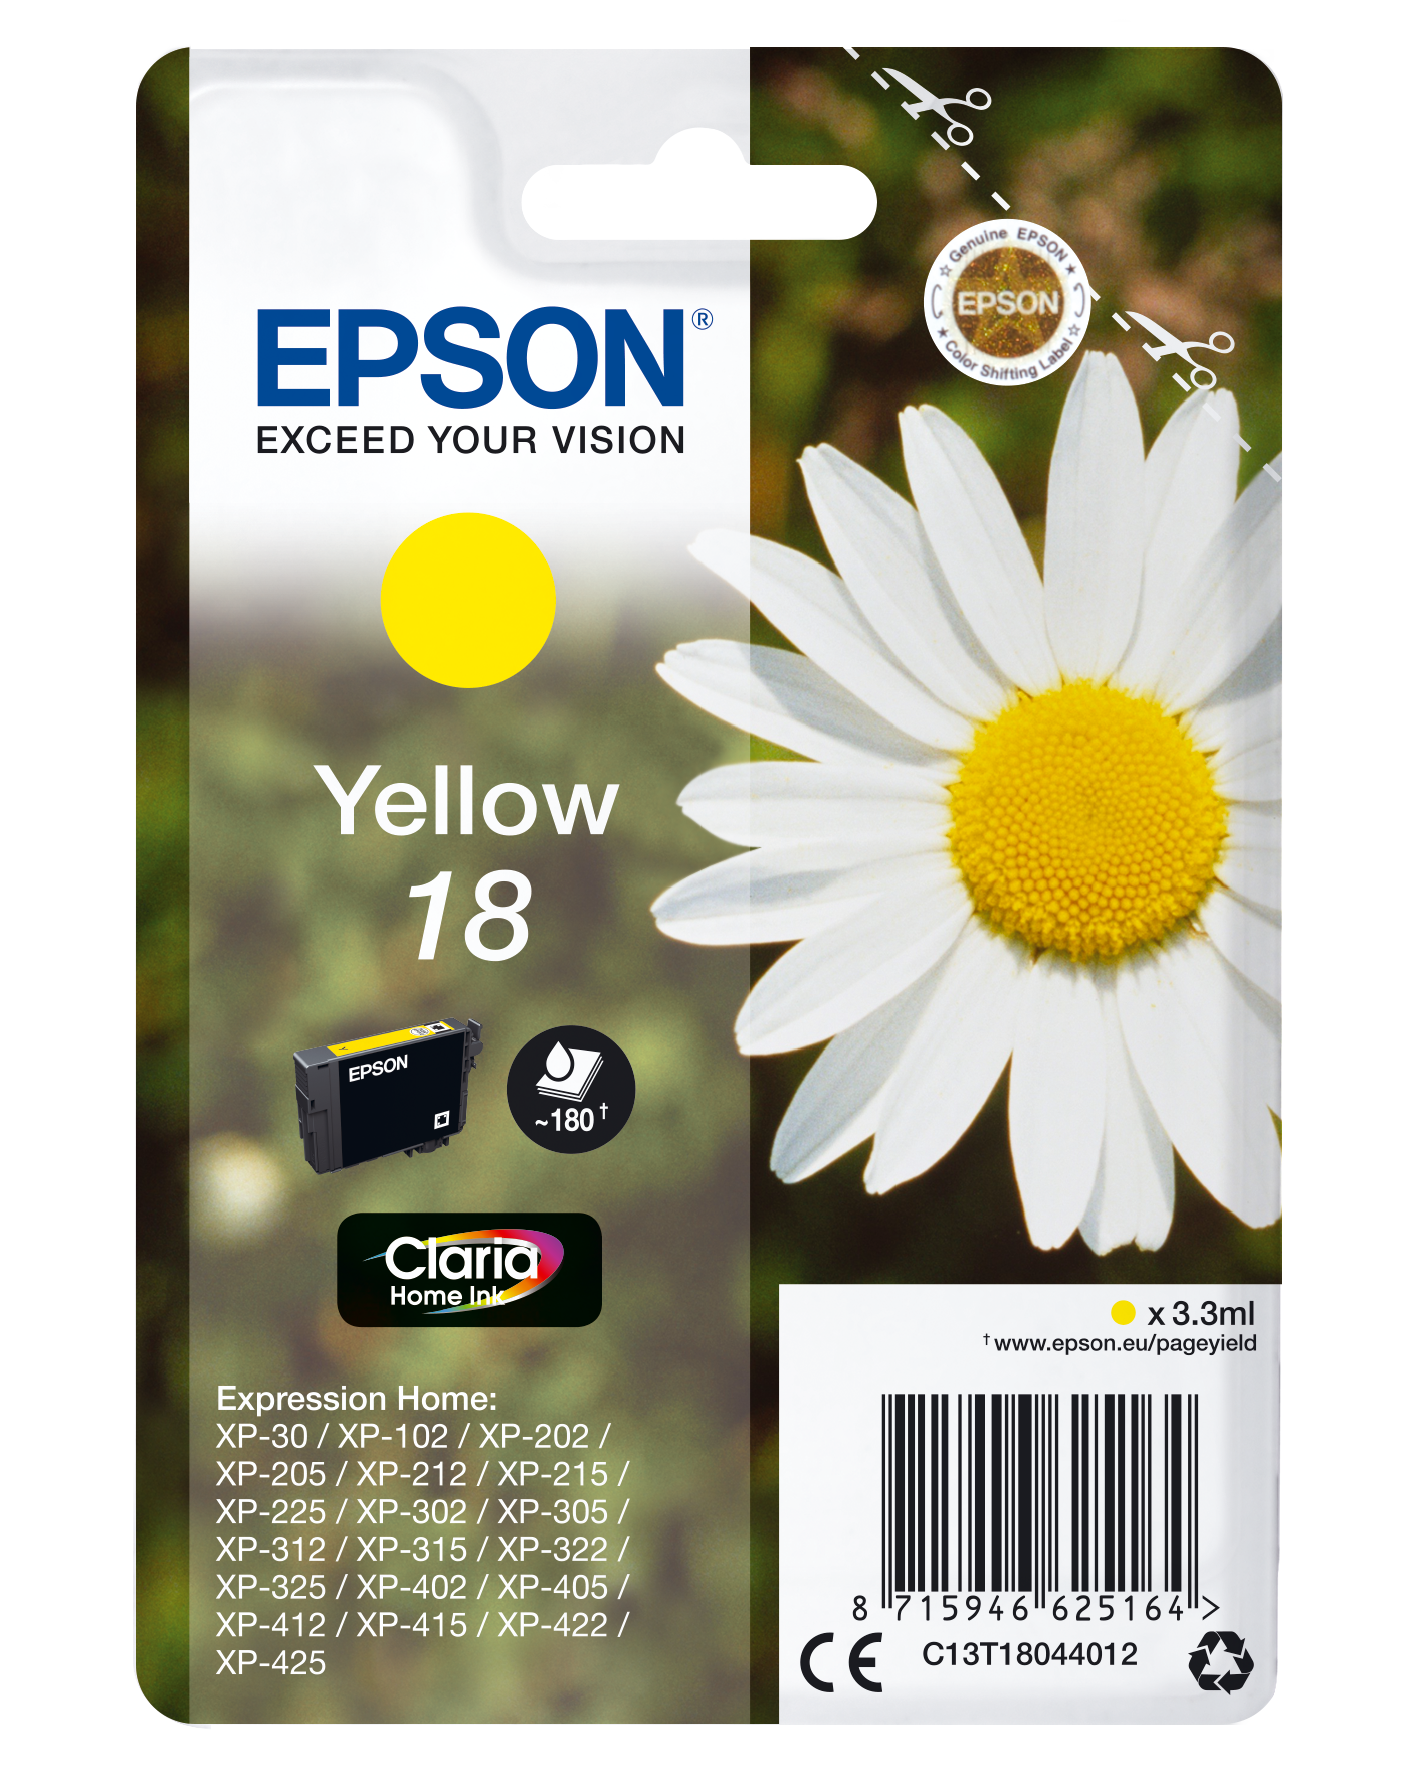 Epson Daisy Claria Home Ink-reeks single pack / geel